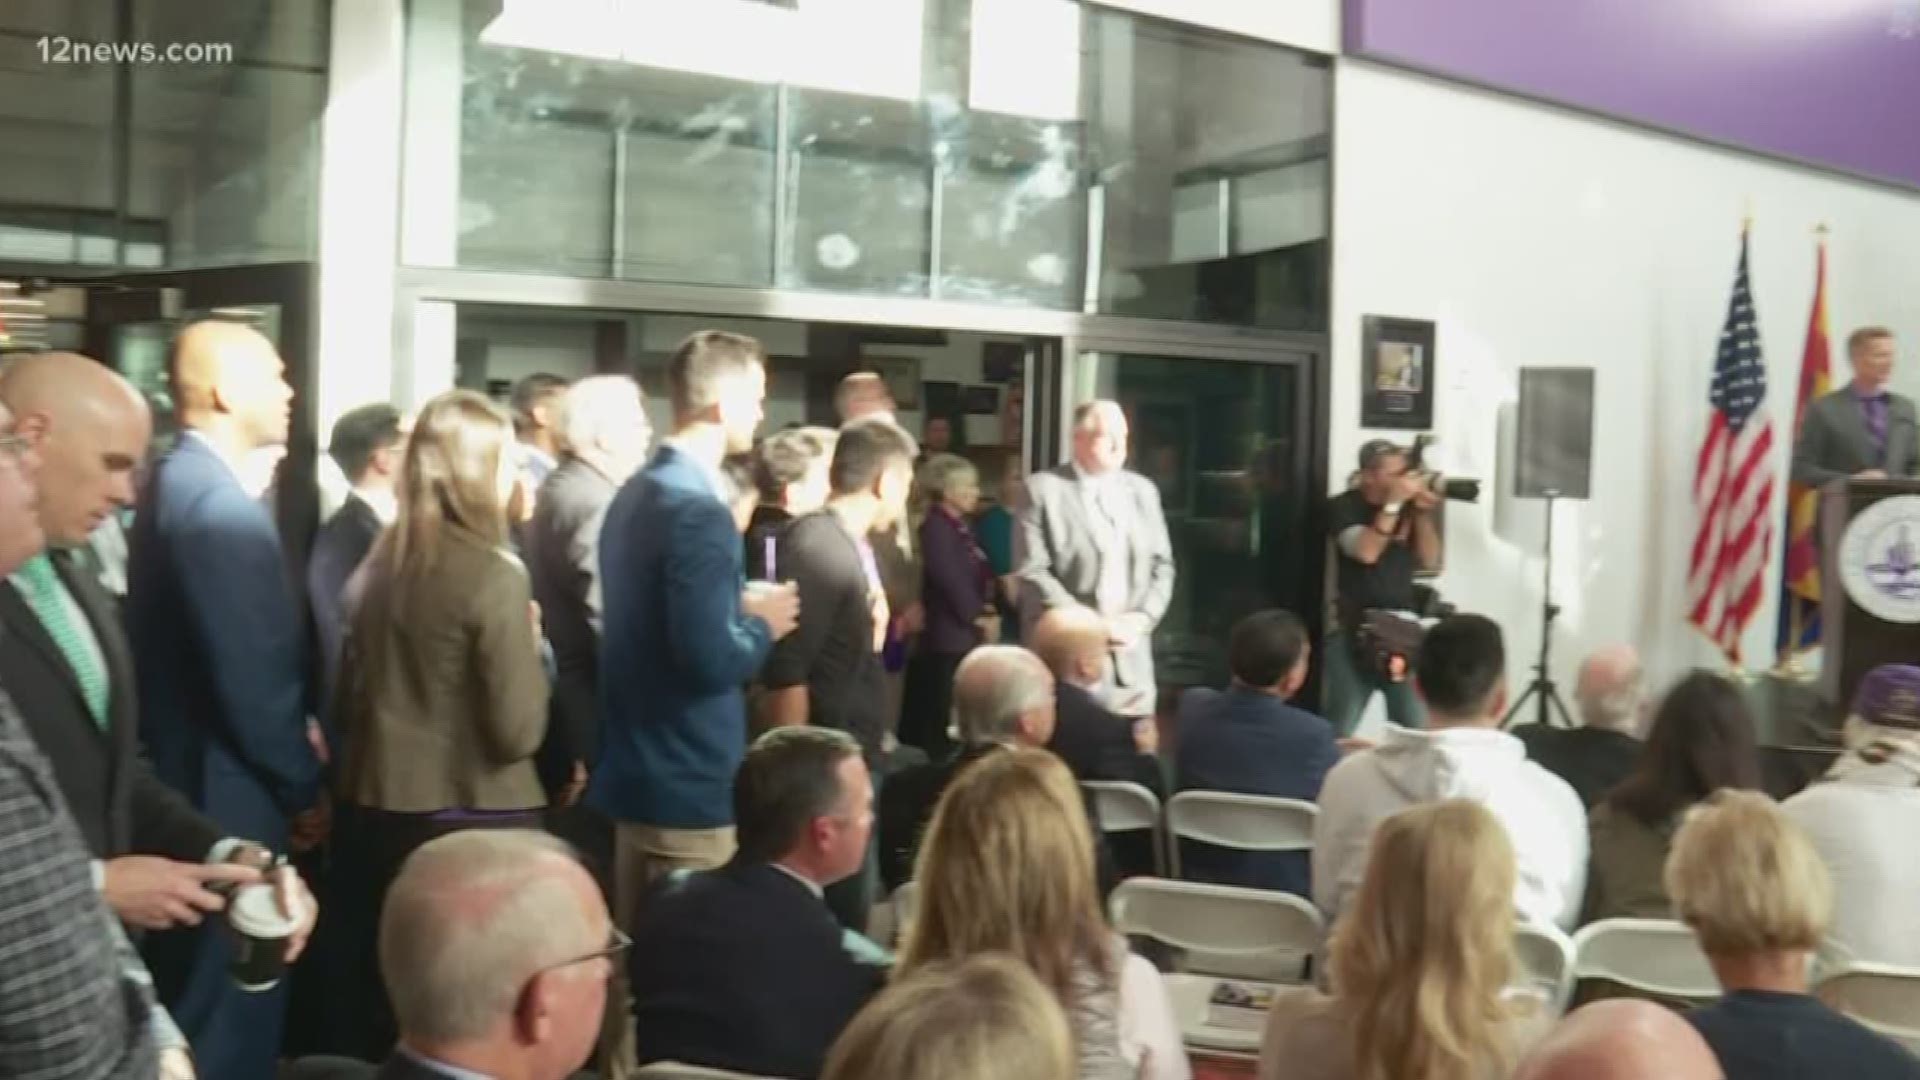 Grand Canyon University has a new home for its 16,000+ business students. Today, GCU unveiled a 150,000 square-foot building dedicated to former Phoenix Suns owner, Jerry Colangelo.